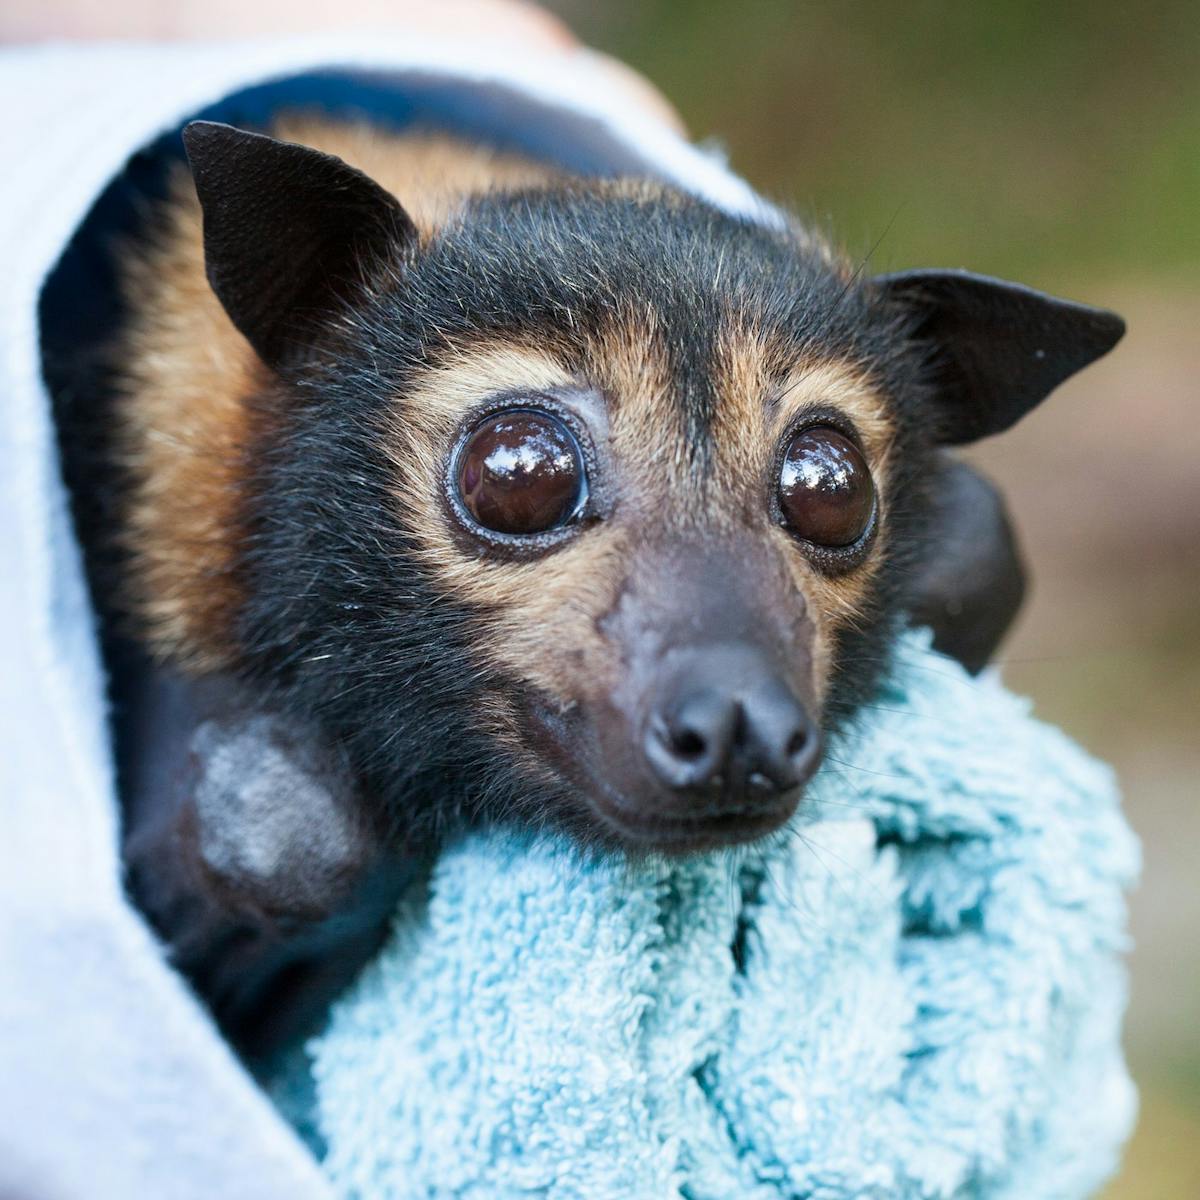 Our laws failed these flying-foxes at turn. On Saturday, Cairns council will put another nail in the coffin